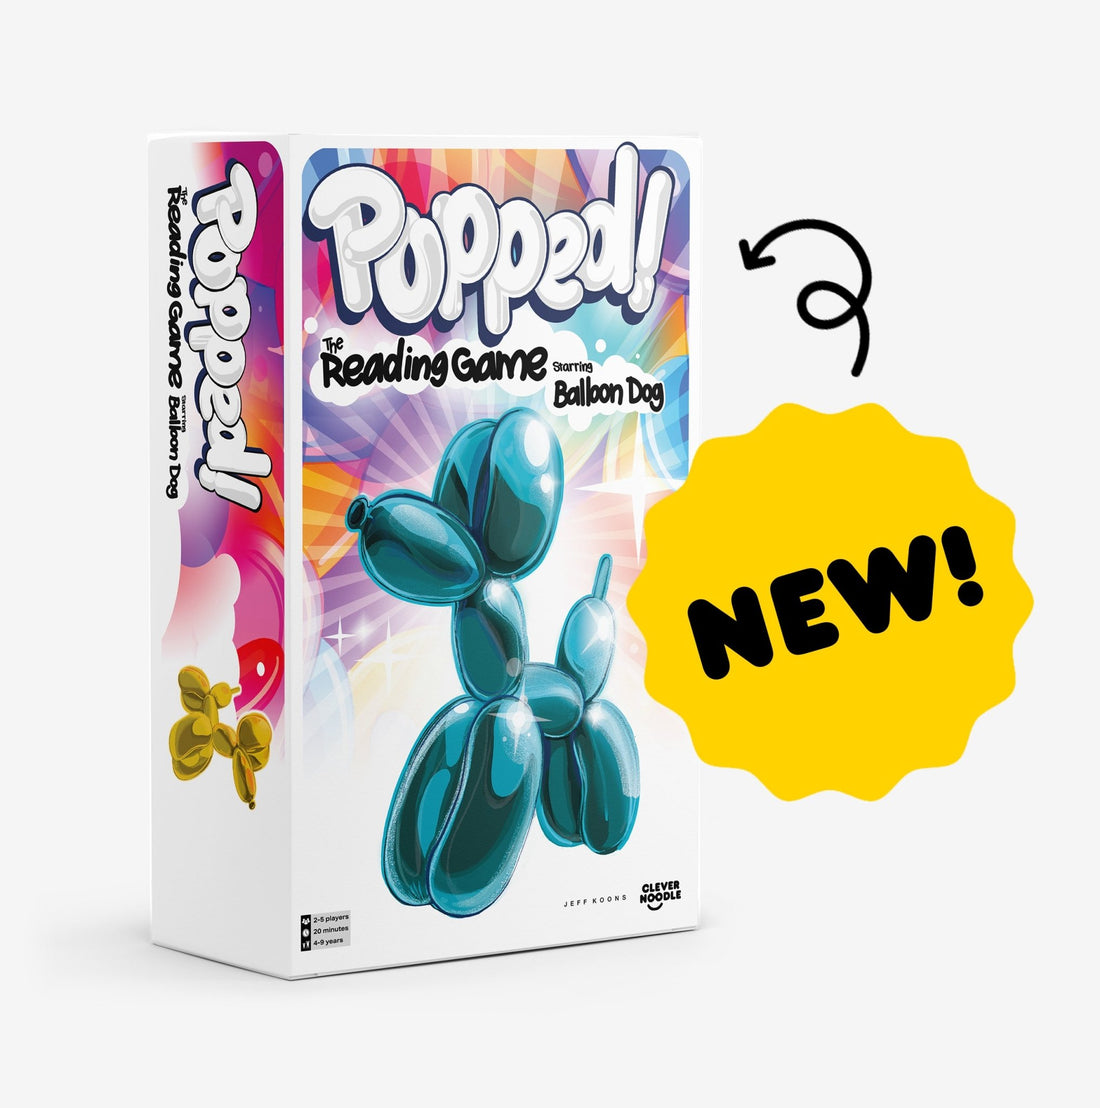 Popped! 250 CVC Word Card Game with Balloon Dog